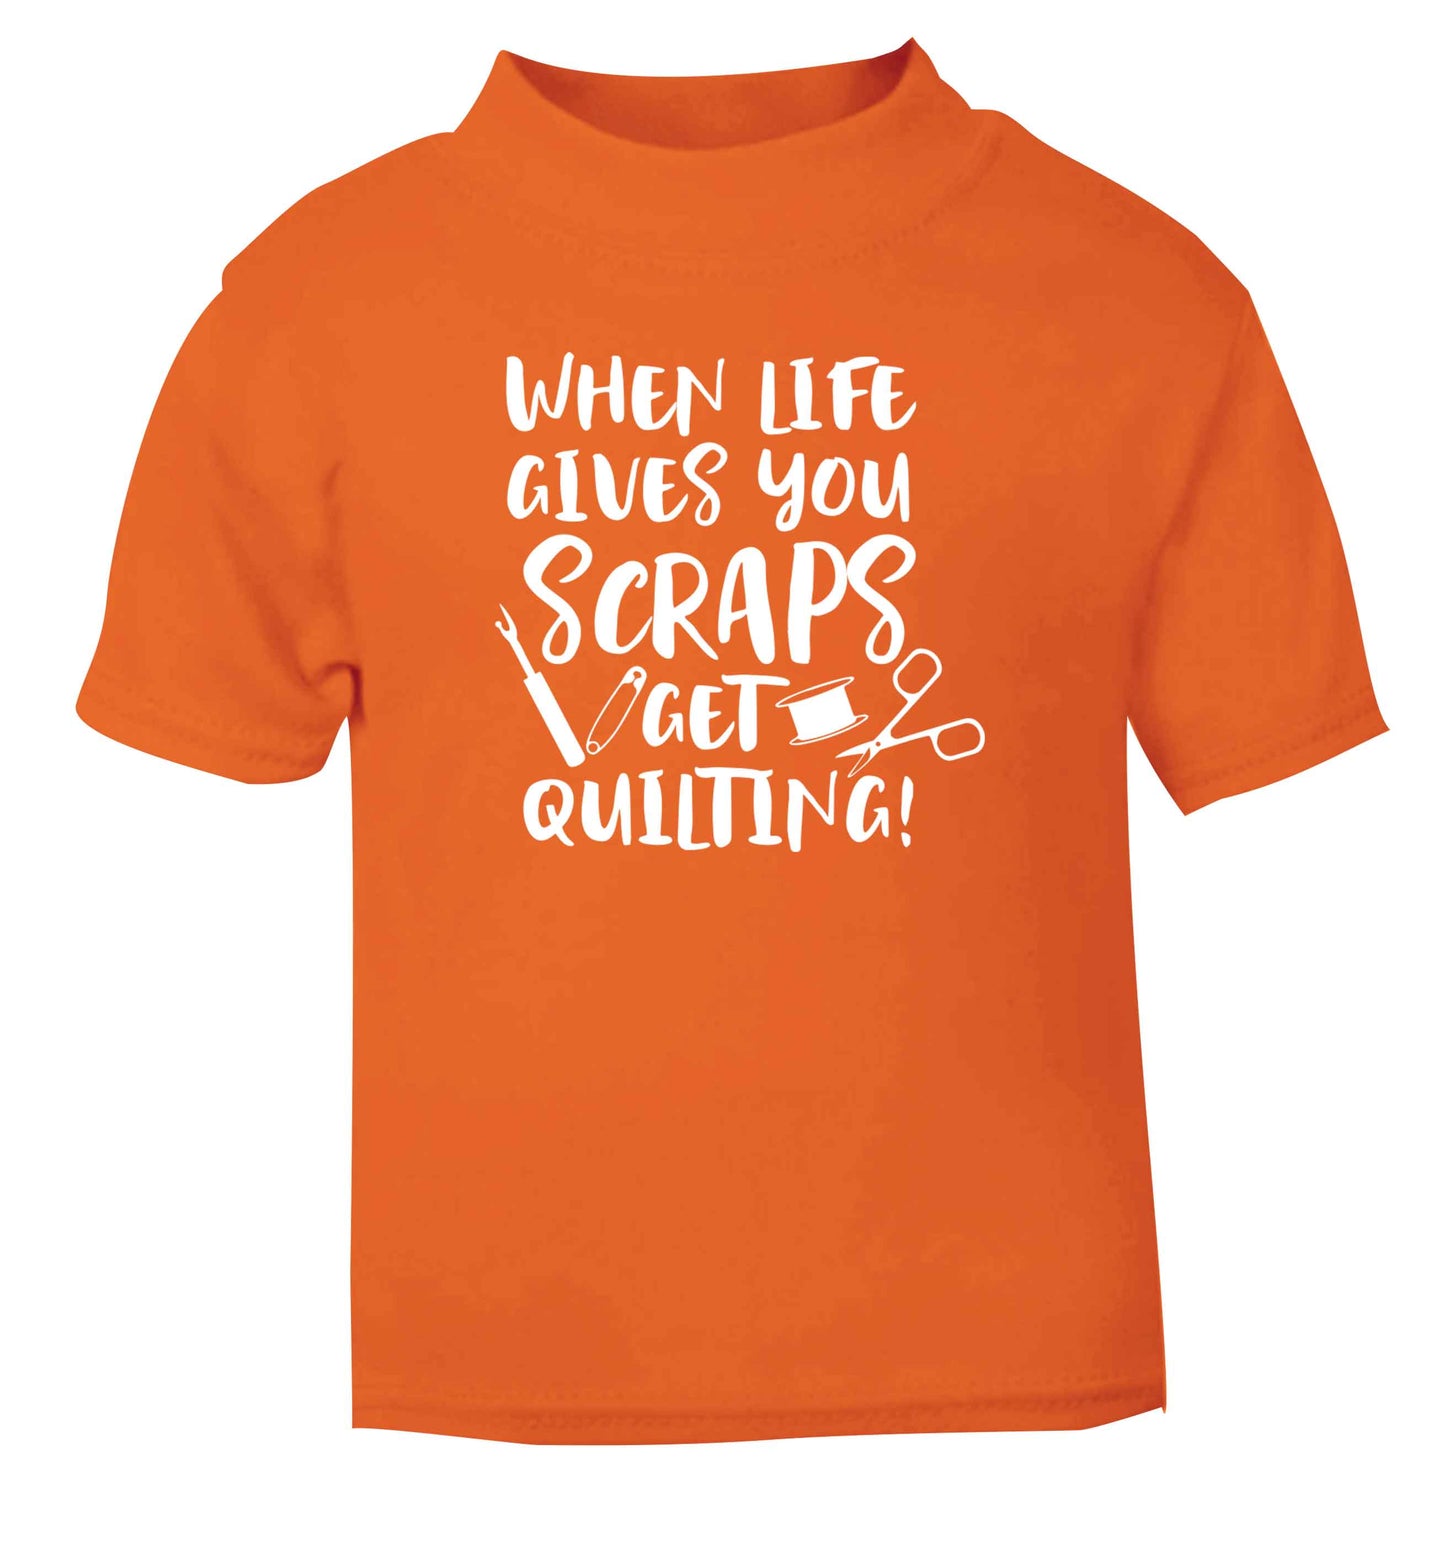 When life gives you scraps get quilting! orange Baby Toddler Tshirt 2 Years